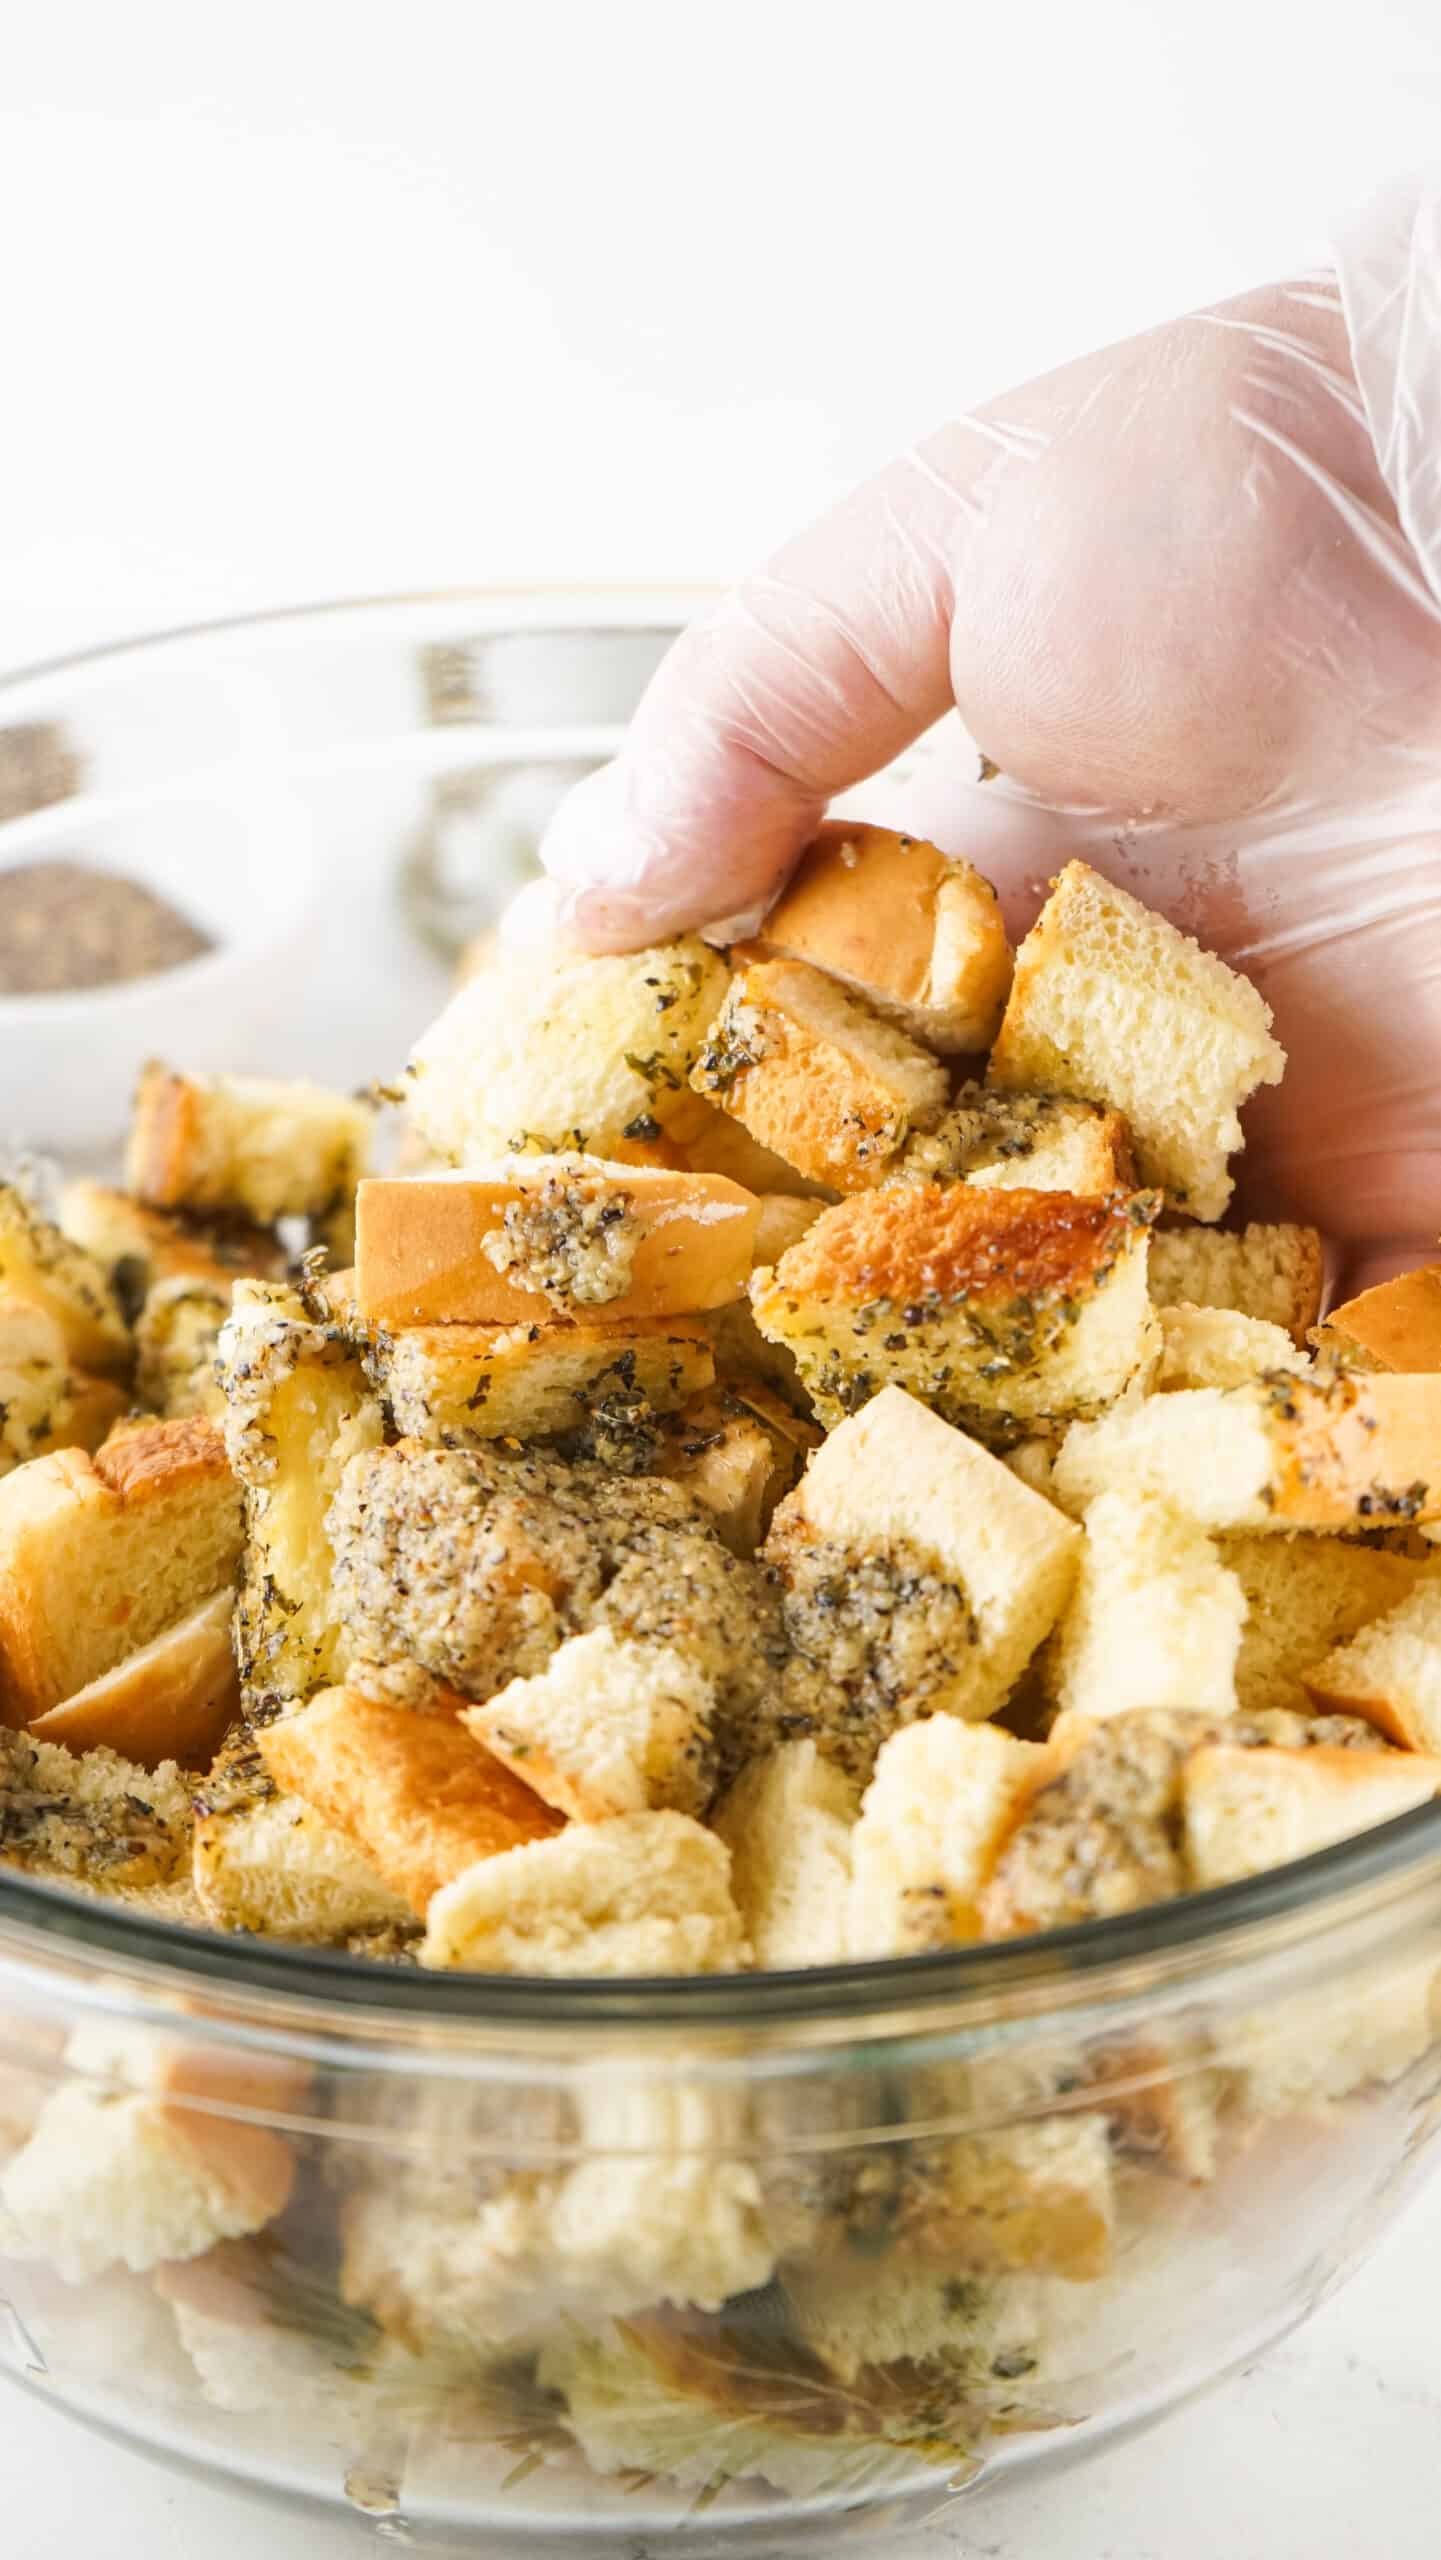 a gloved hand mixing seasonings and bread cubes together before baking croutons